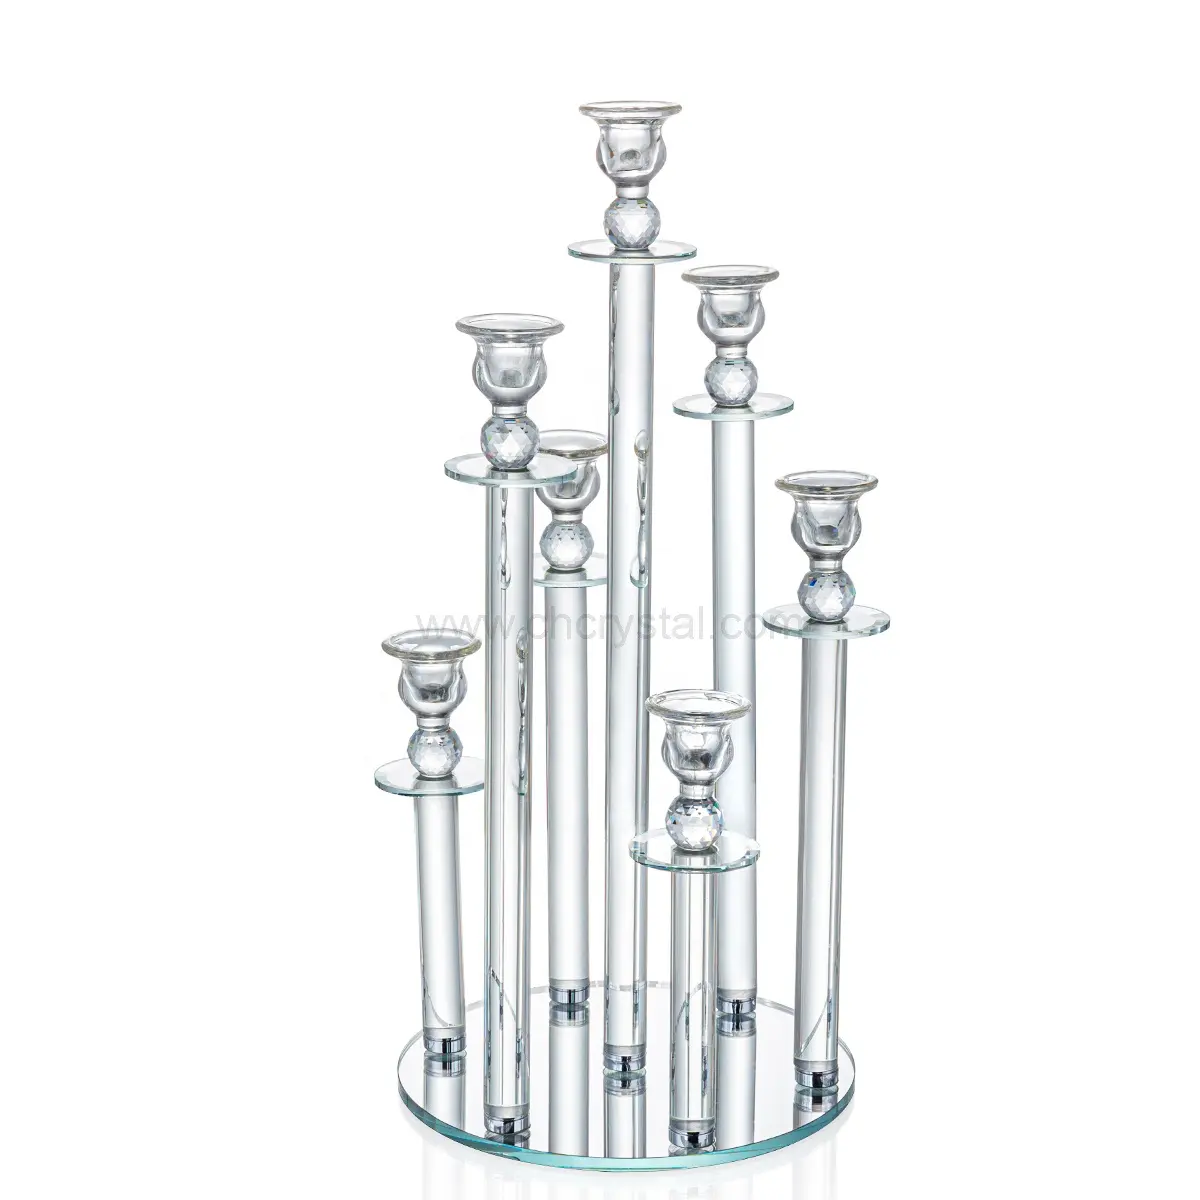 Table decoration 7 arms candle holder tall K9 crystal with Circular base glass tubes wedding candelabra sale used